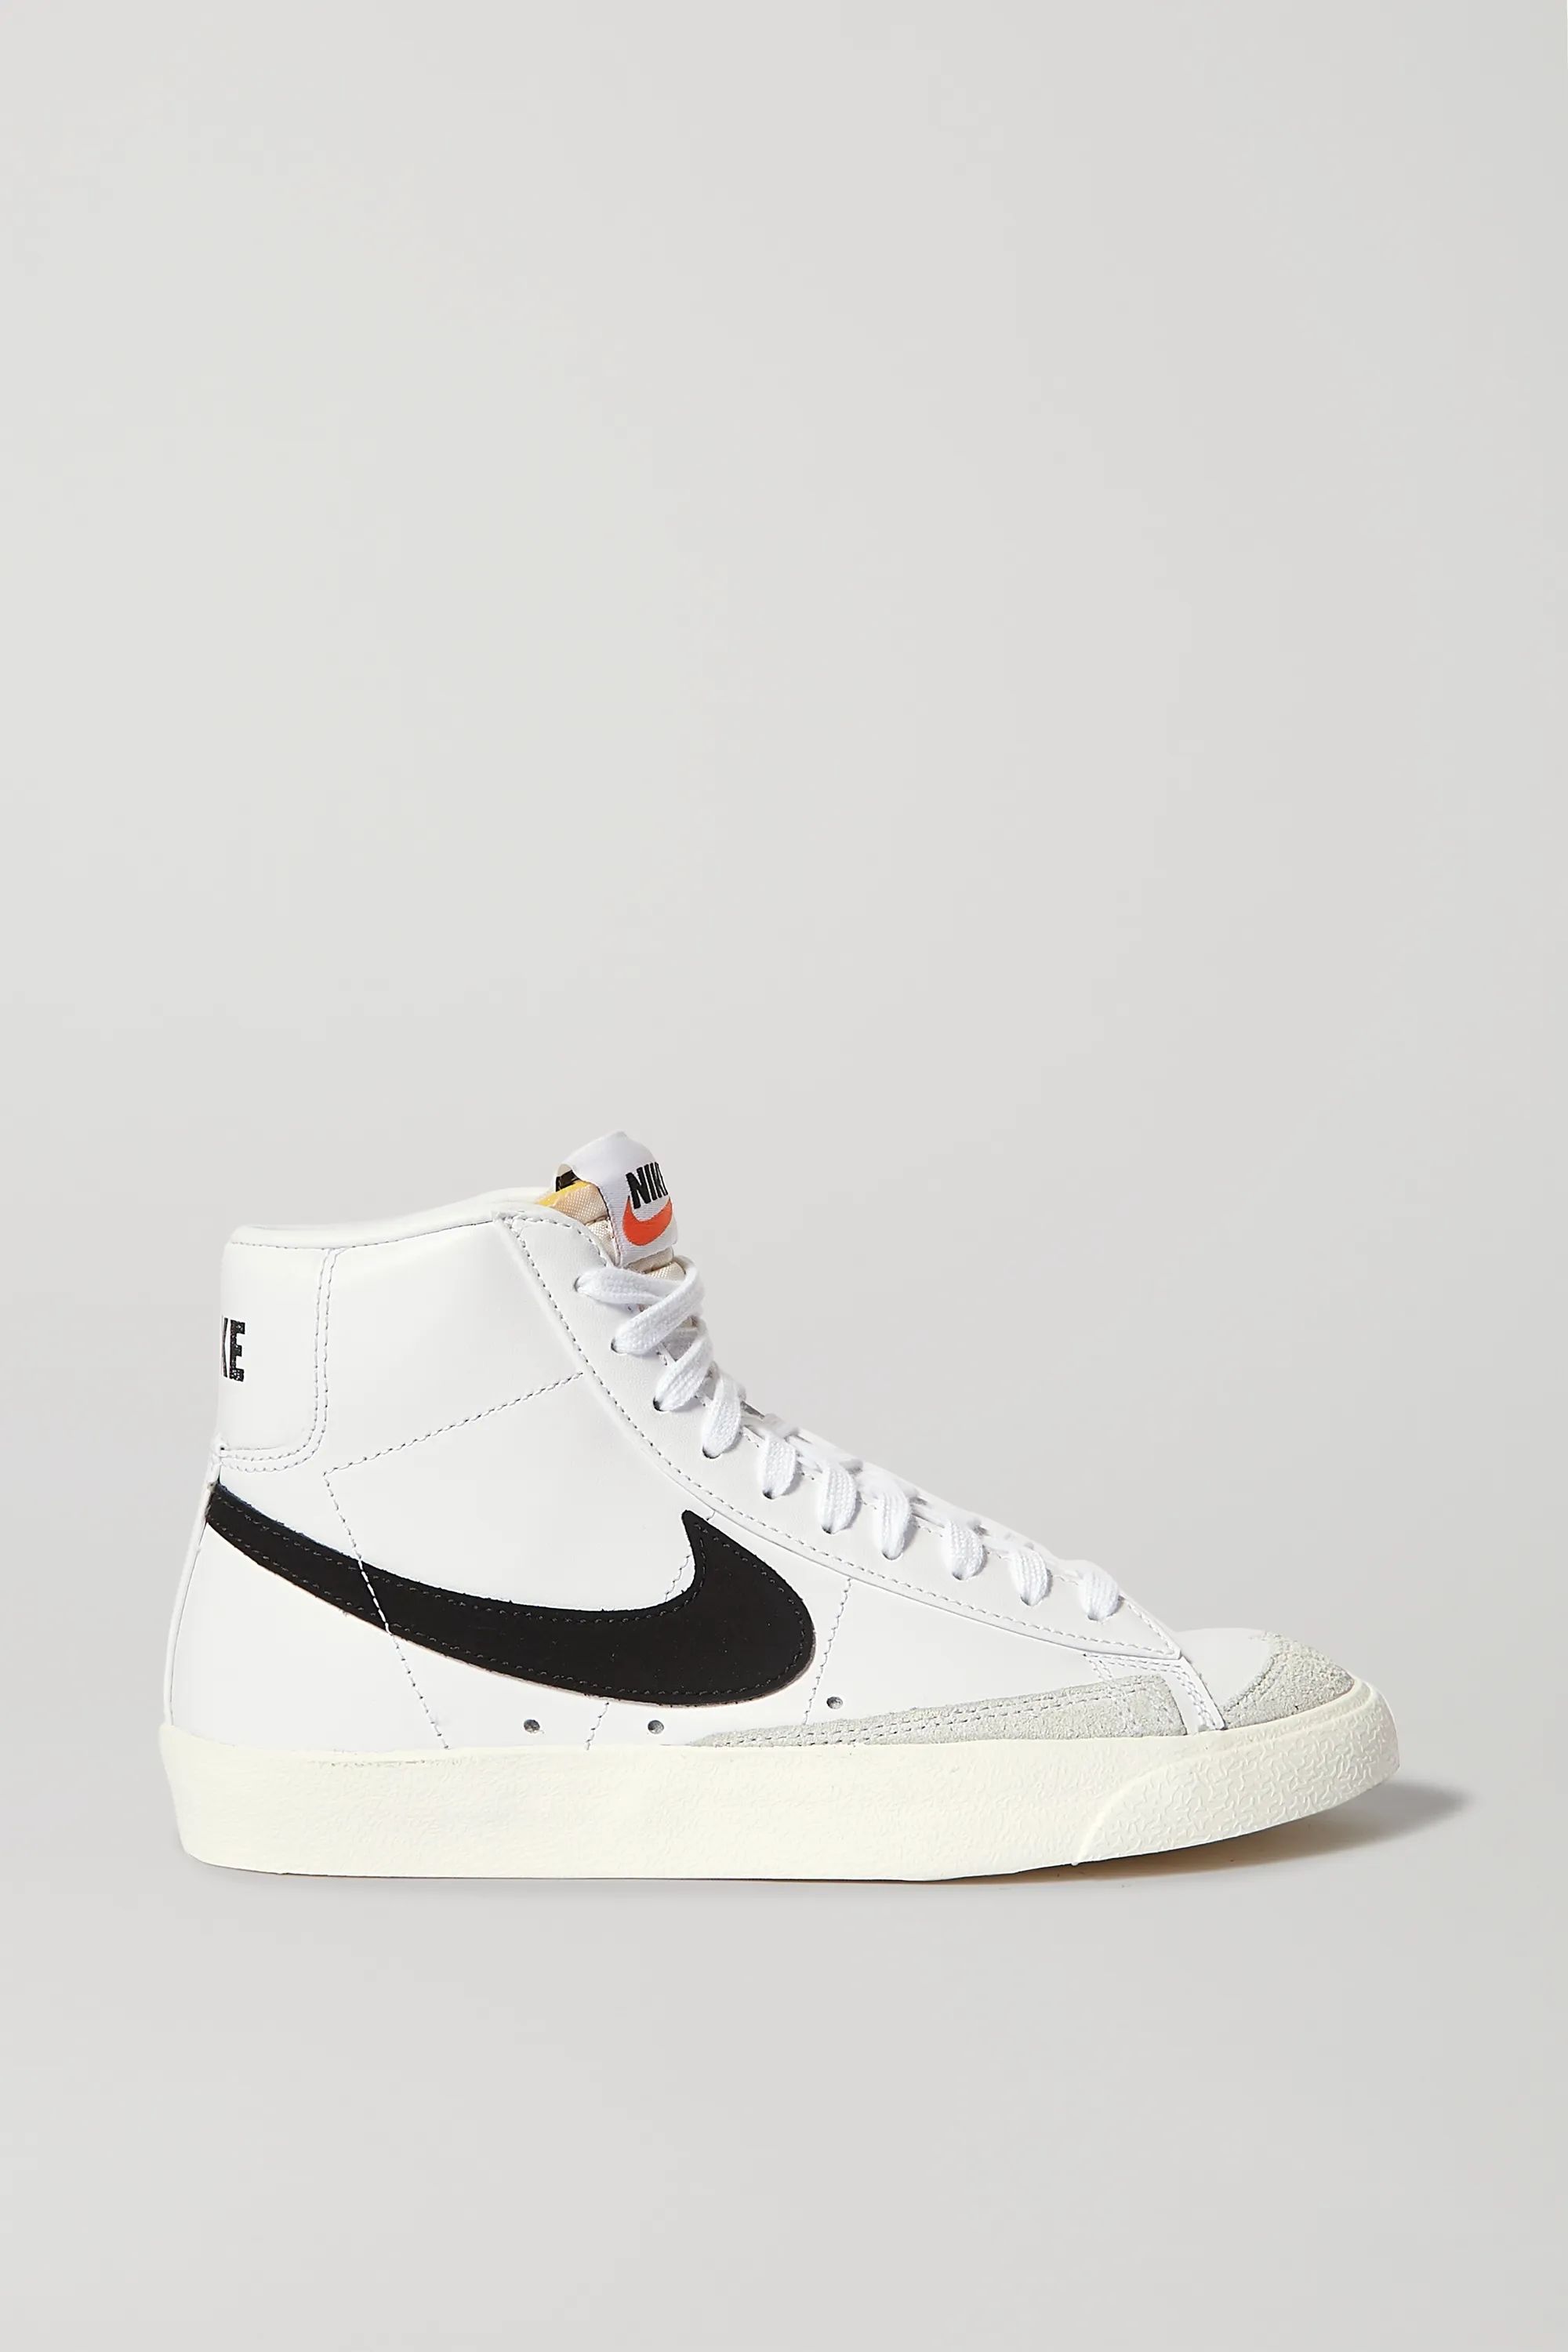 Blazer Mid suede-trimmed leather high-top sneakers | NET-A-PORTER (UK & EU)